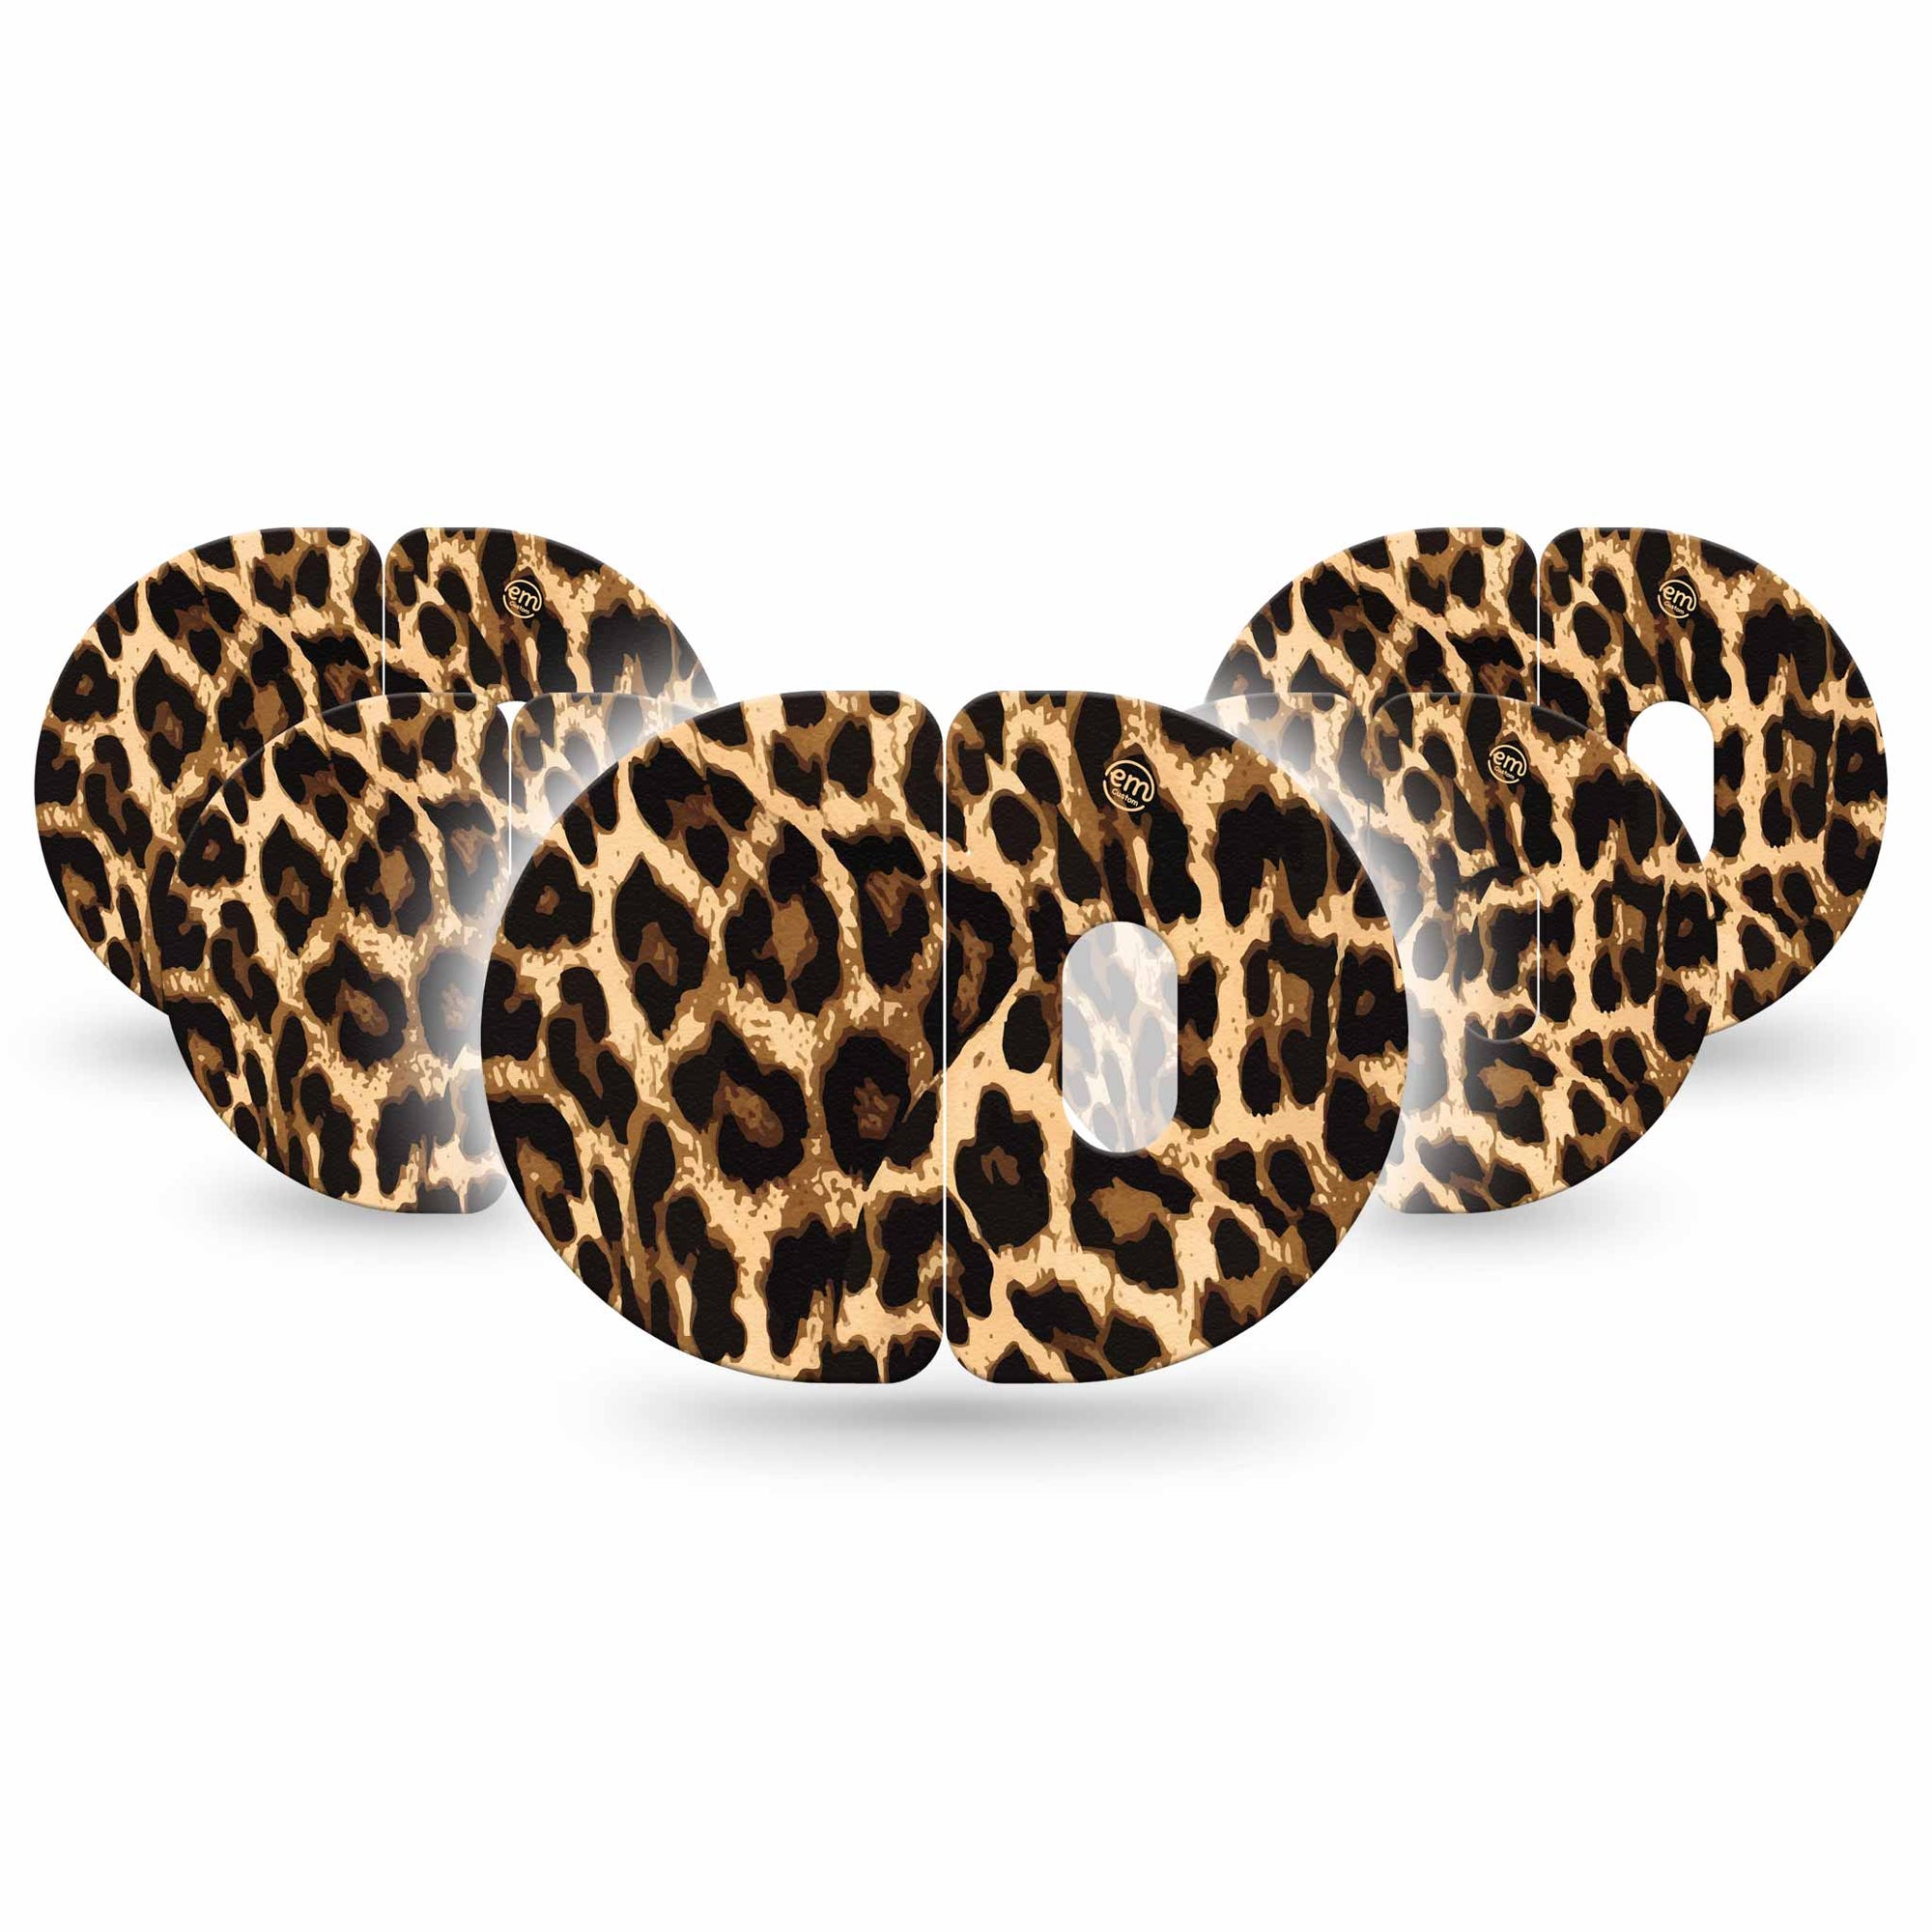 Medtronic Enlite / Guardian ExpressionMed Leopard Print 2-Piece Enlite Medtronic Adhesive Patch, 5-Pack, Animal Print Themed CGM Tape